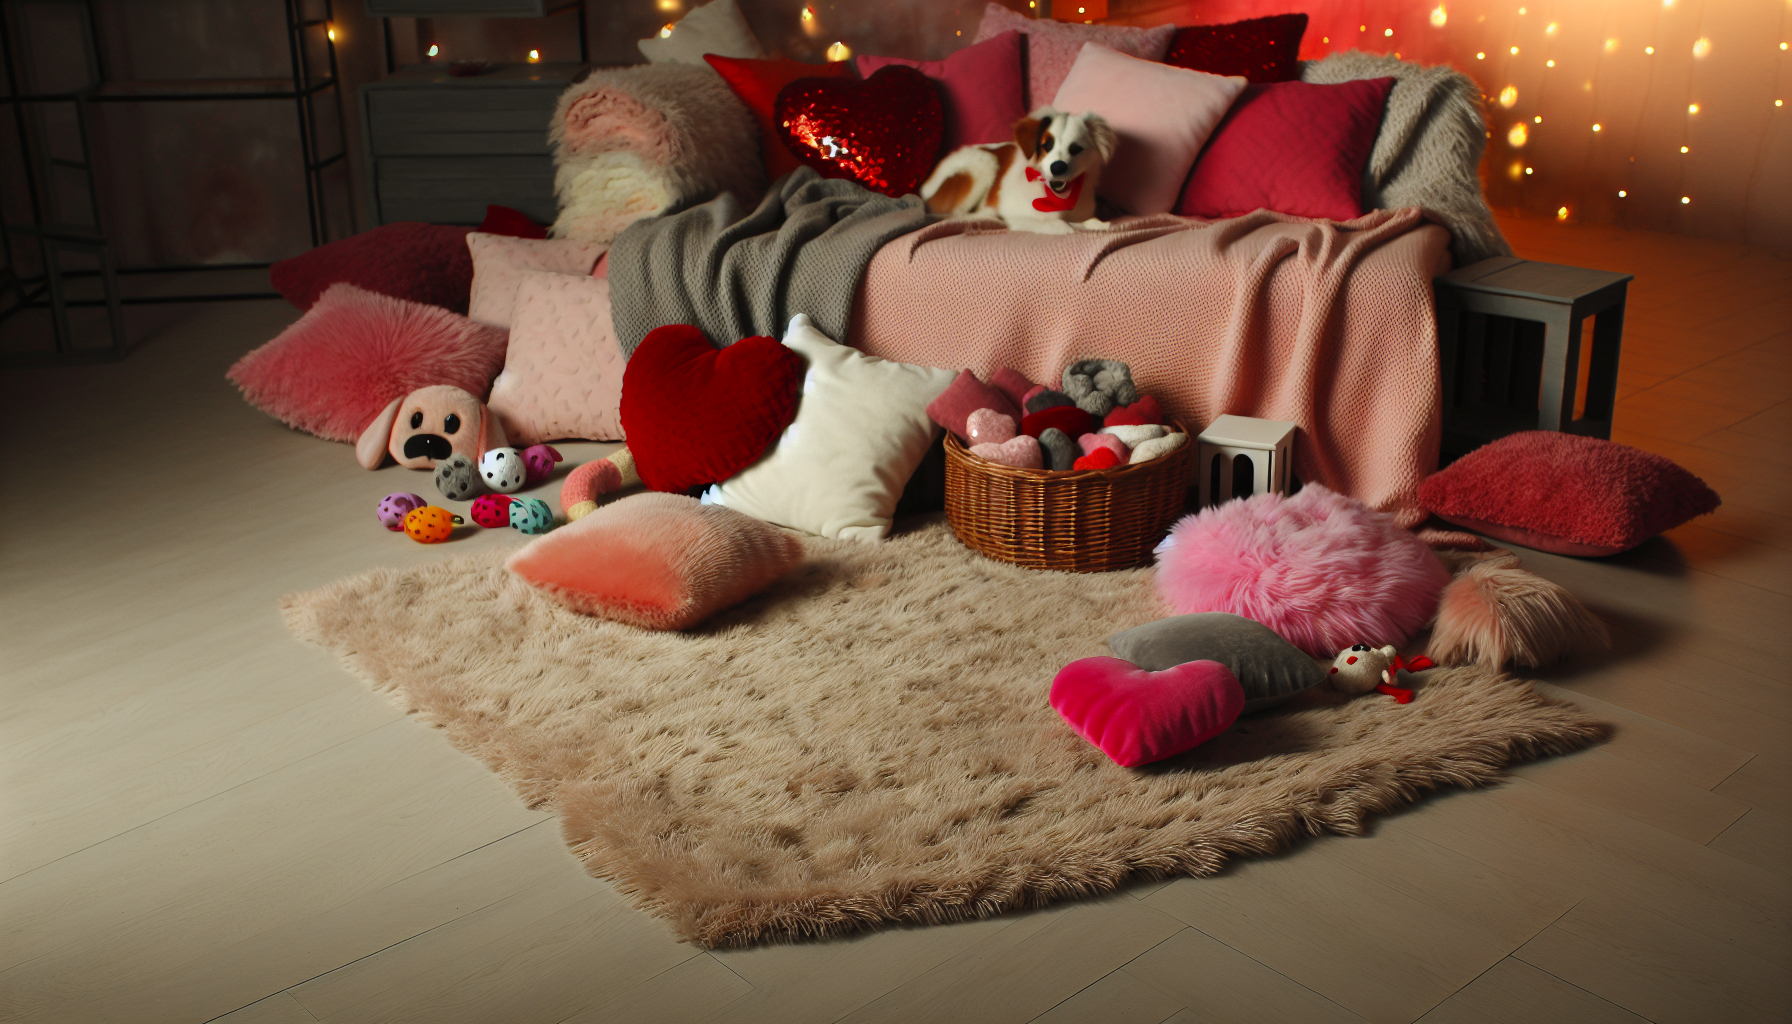 A cozy cuddle space with blankets, pillows, and pet toys